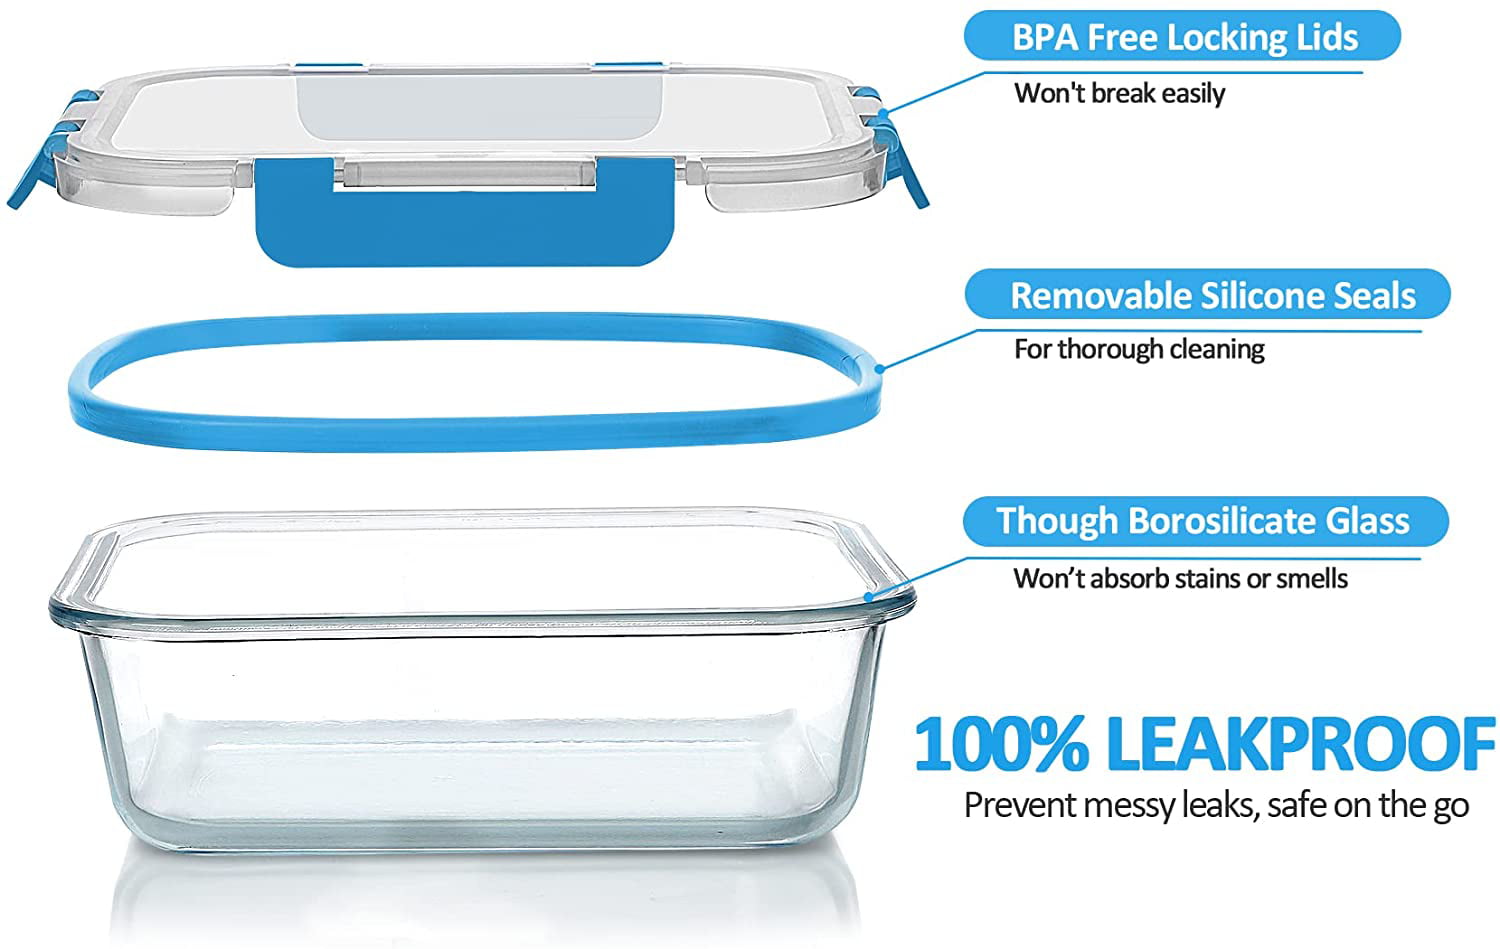 FREYBLI 24-Piece Premium Borosilicate Glass Food Storage Containers with  Snap Locking Lids, for Meal Prep, Lunch, Leftovers, Airtight Glass Bowls  with